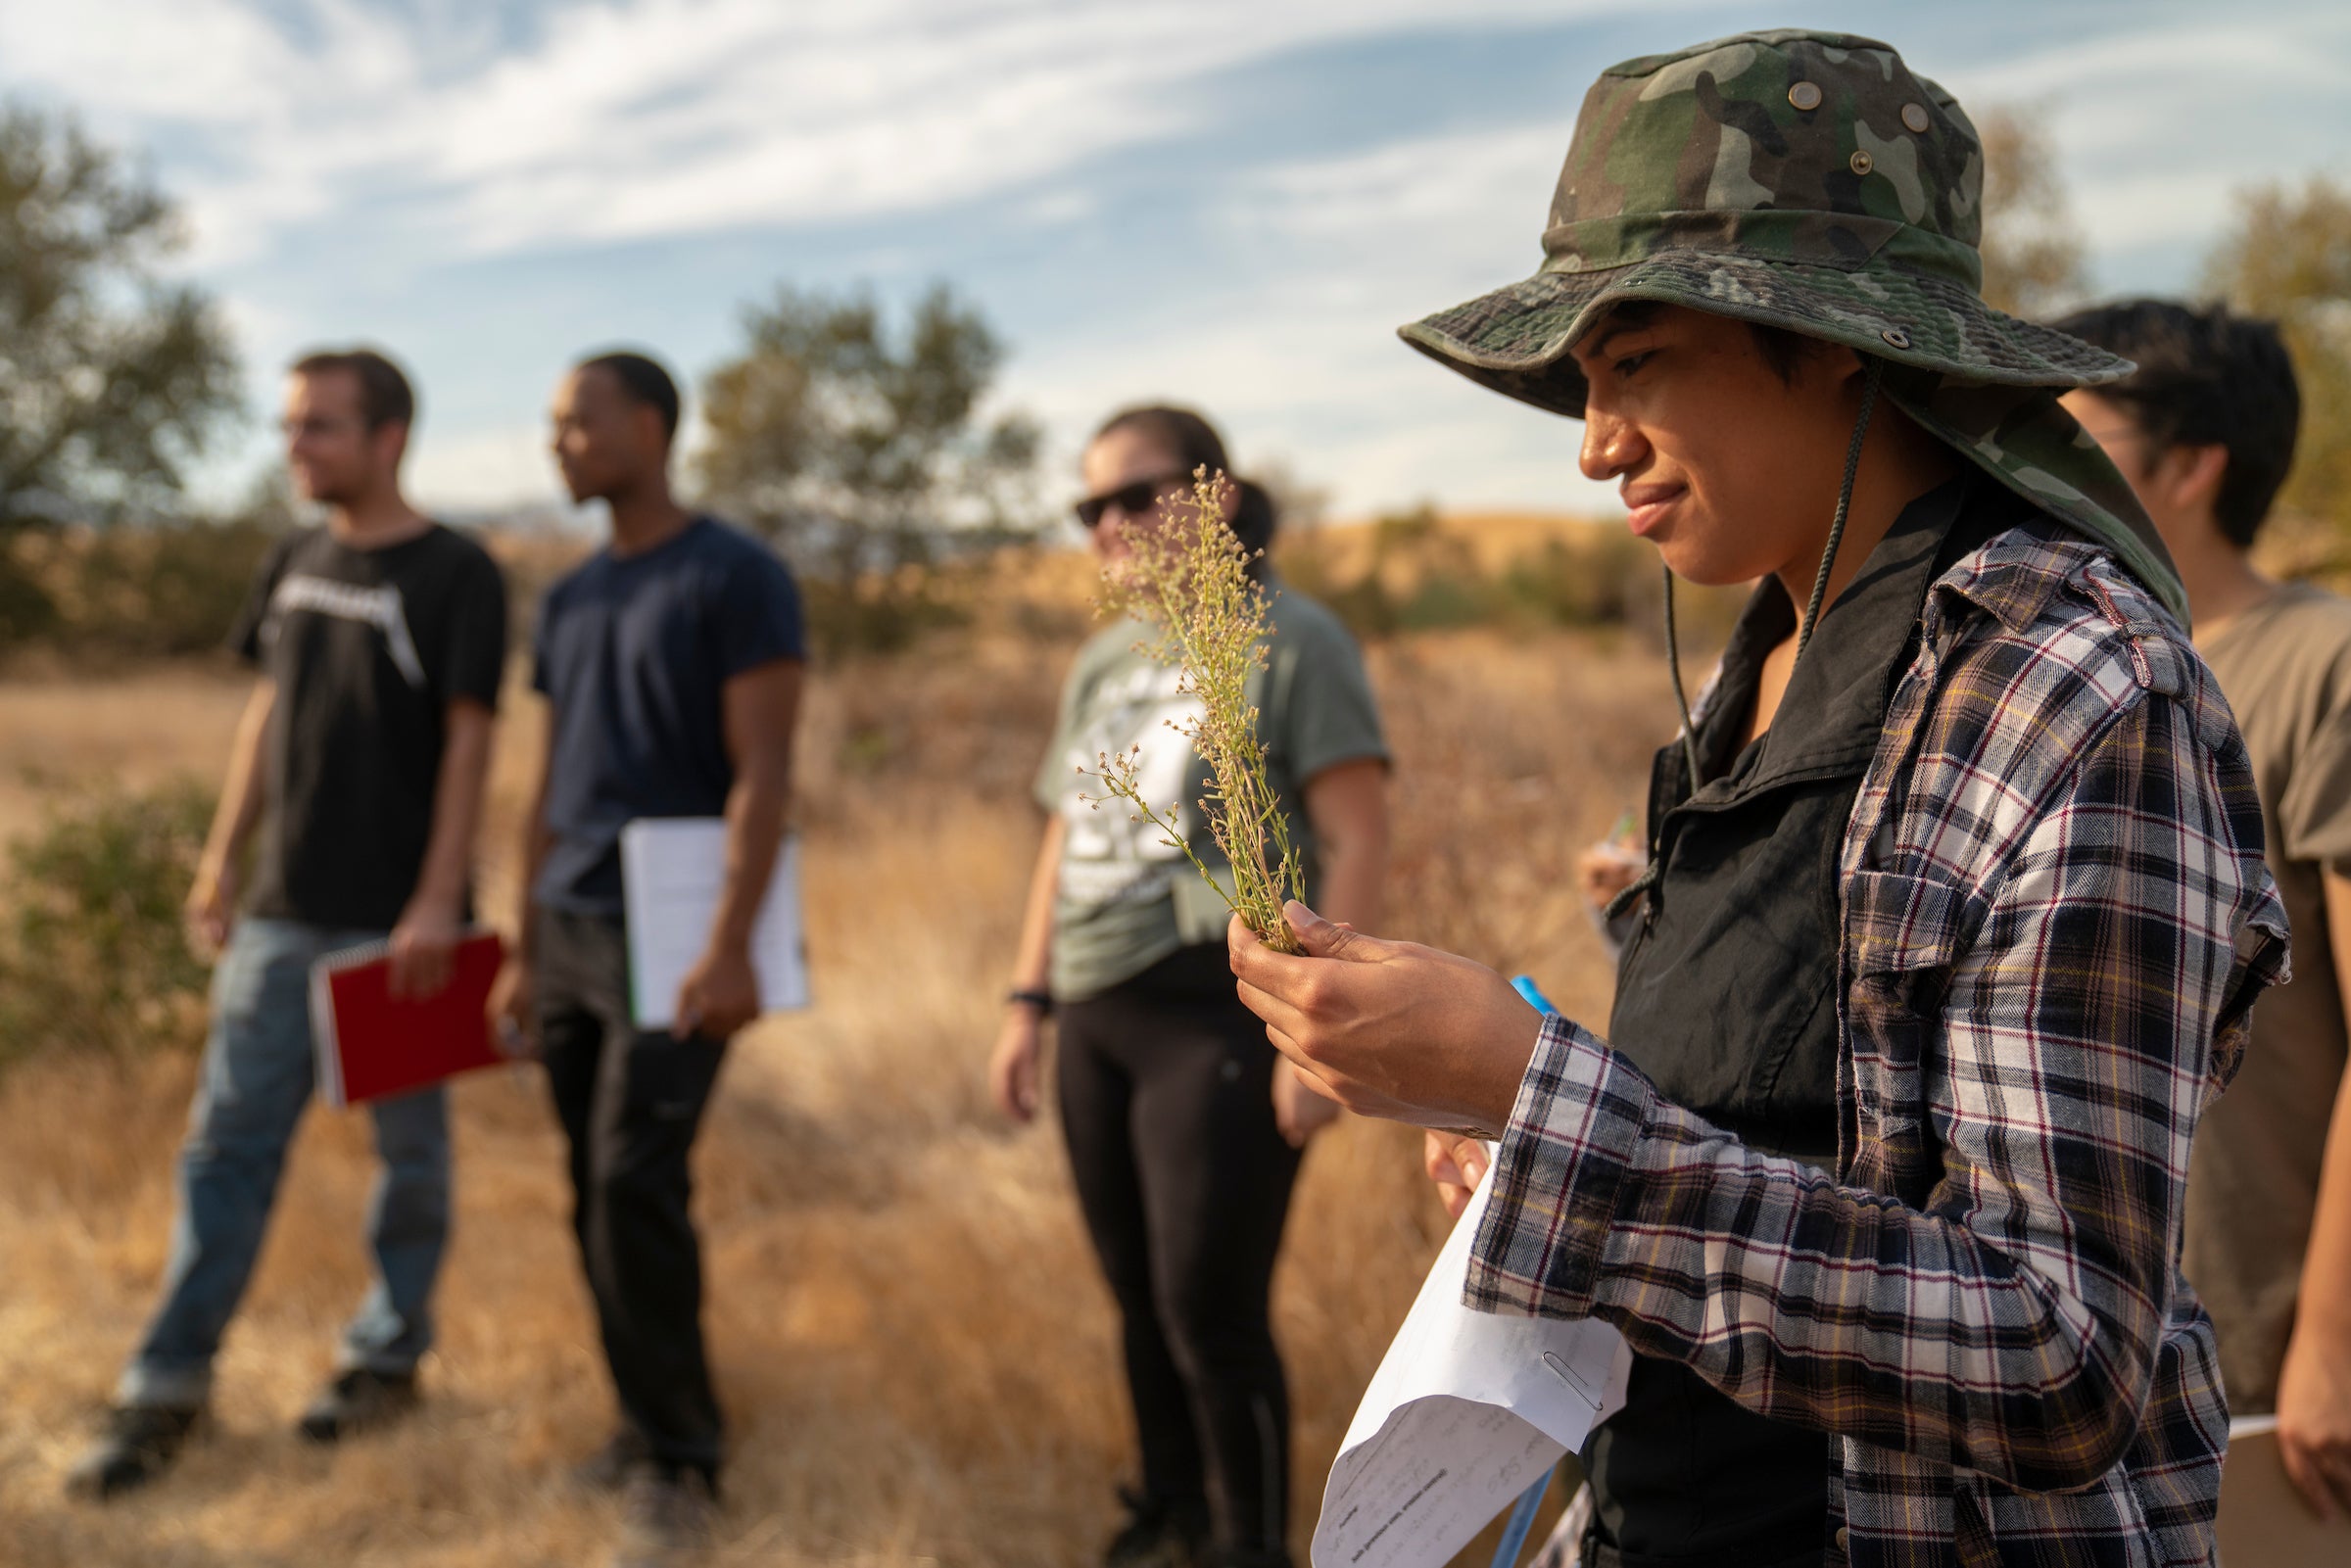 Woman in hat looks at stalk of dried plant in hand outdoors at ranch with three people in background